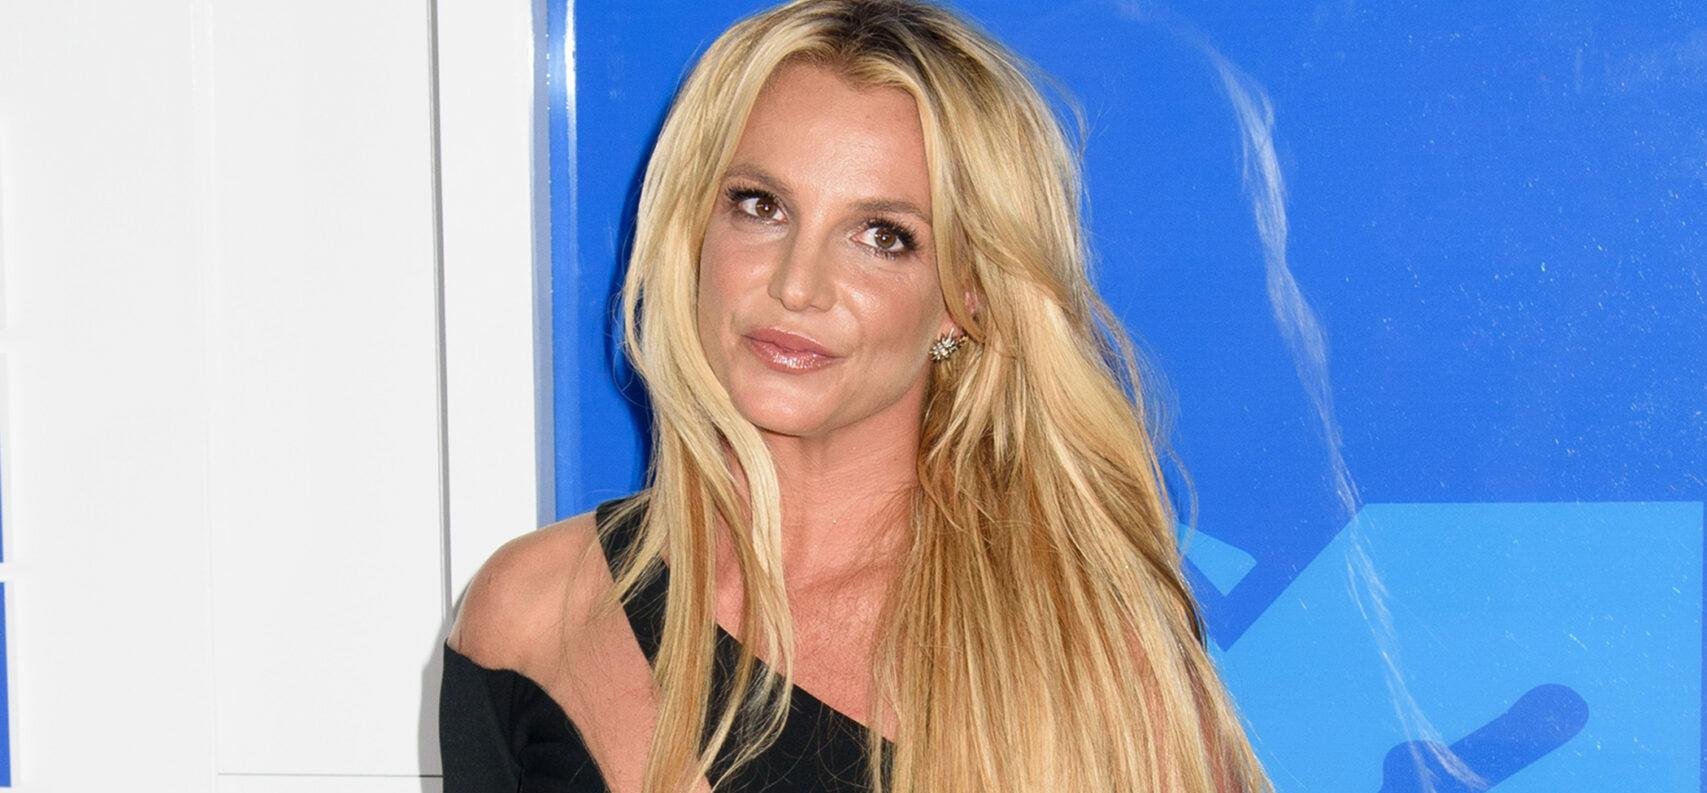 Britney Spears Flies Plane For The First Time: ‘On Cloud 9 Right Now’